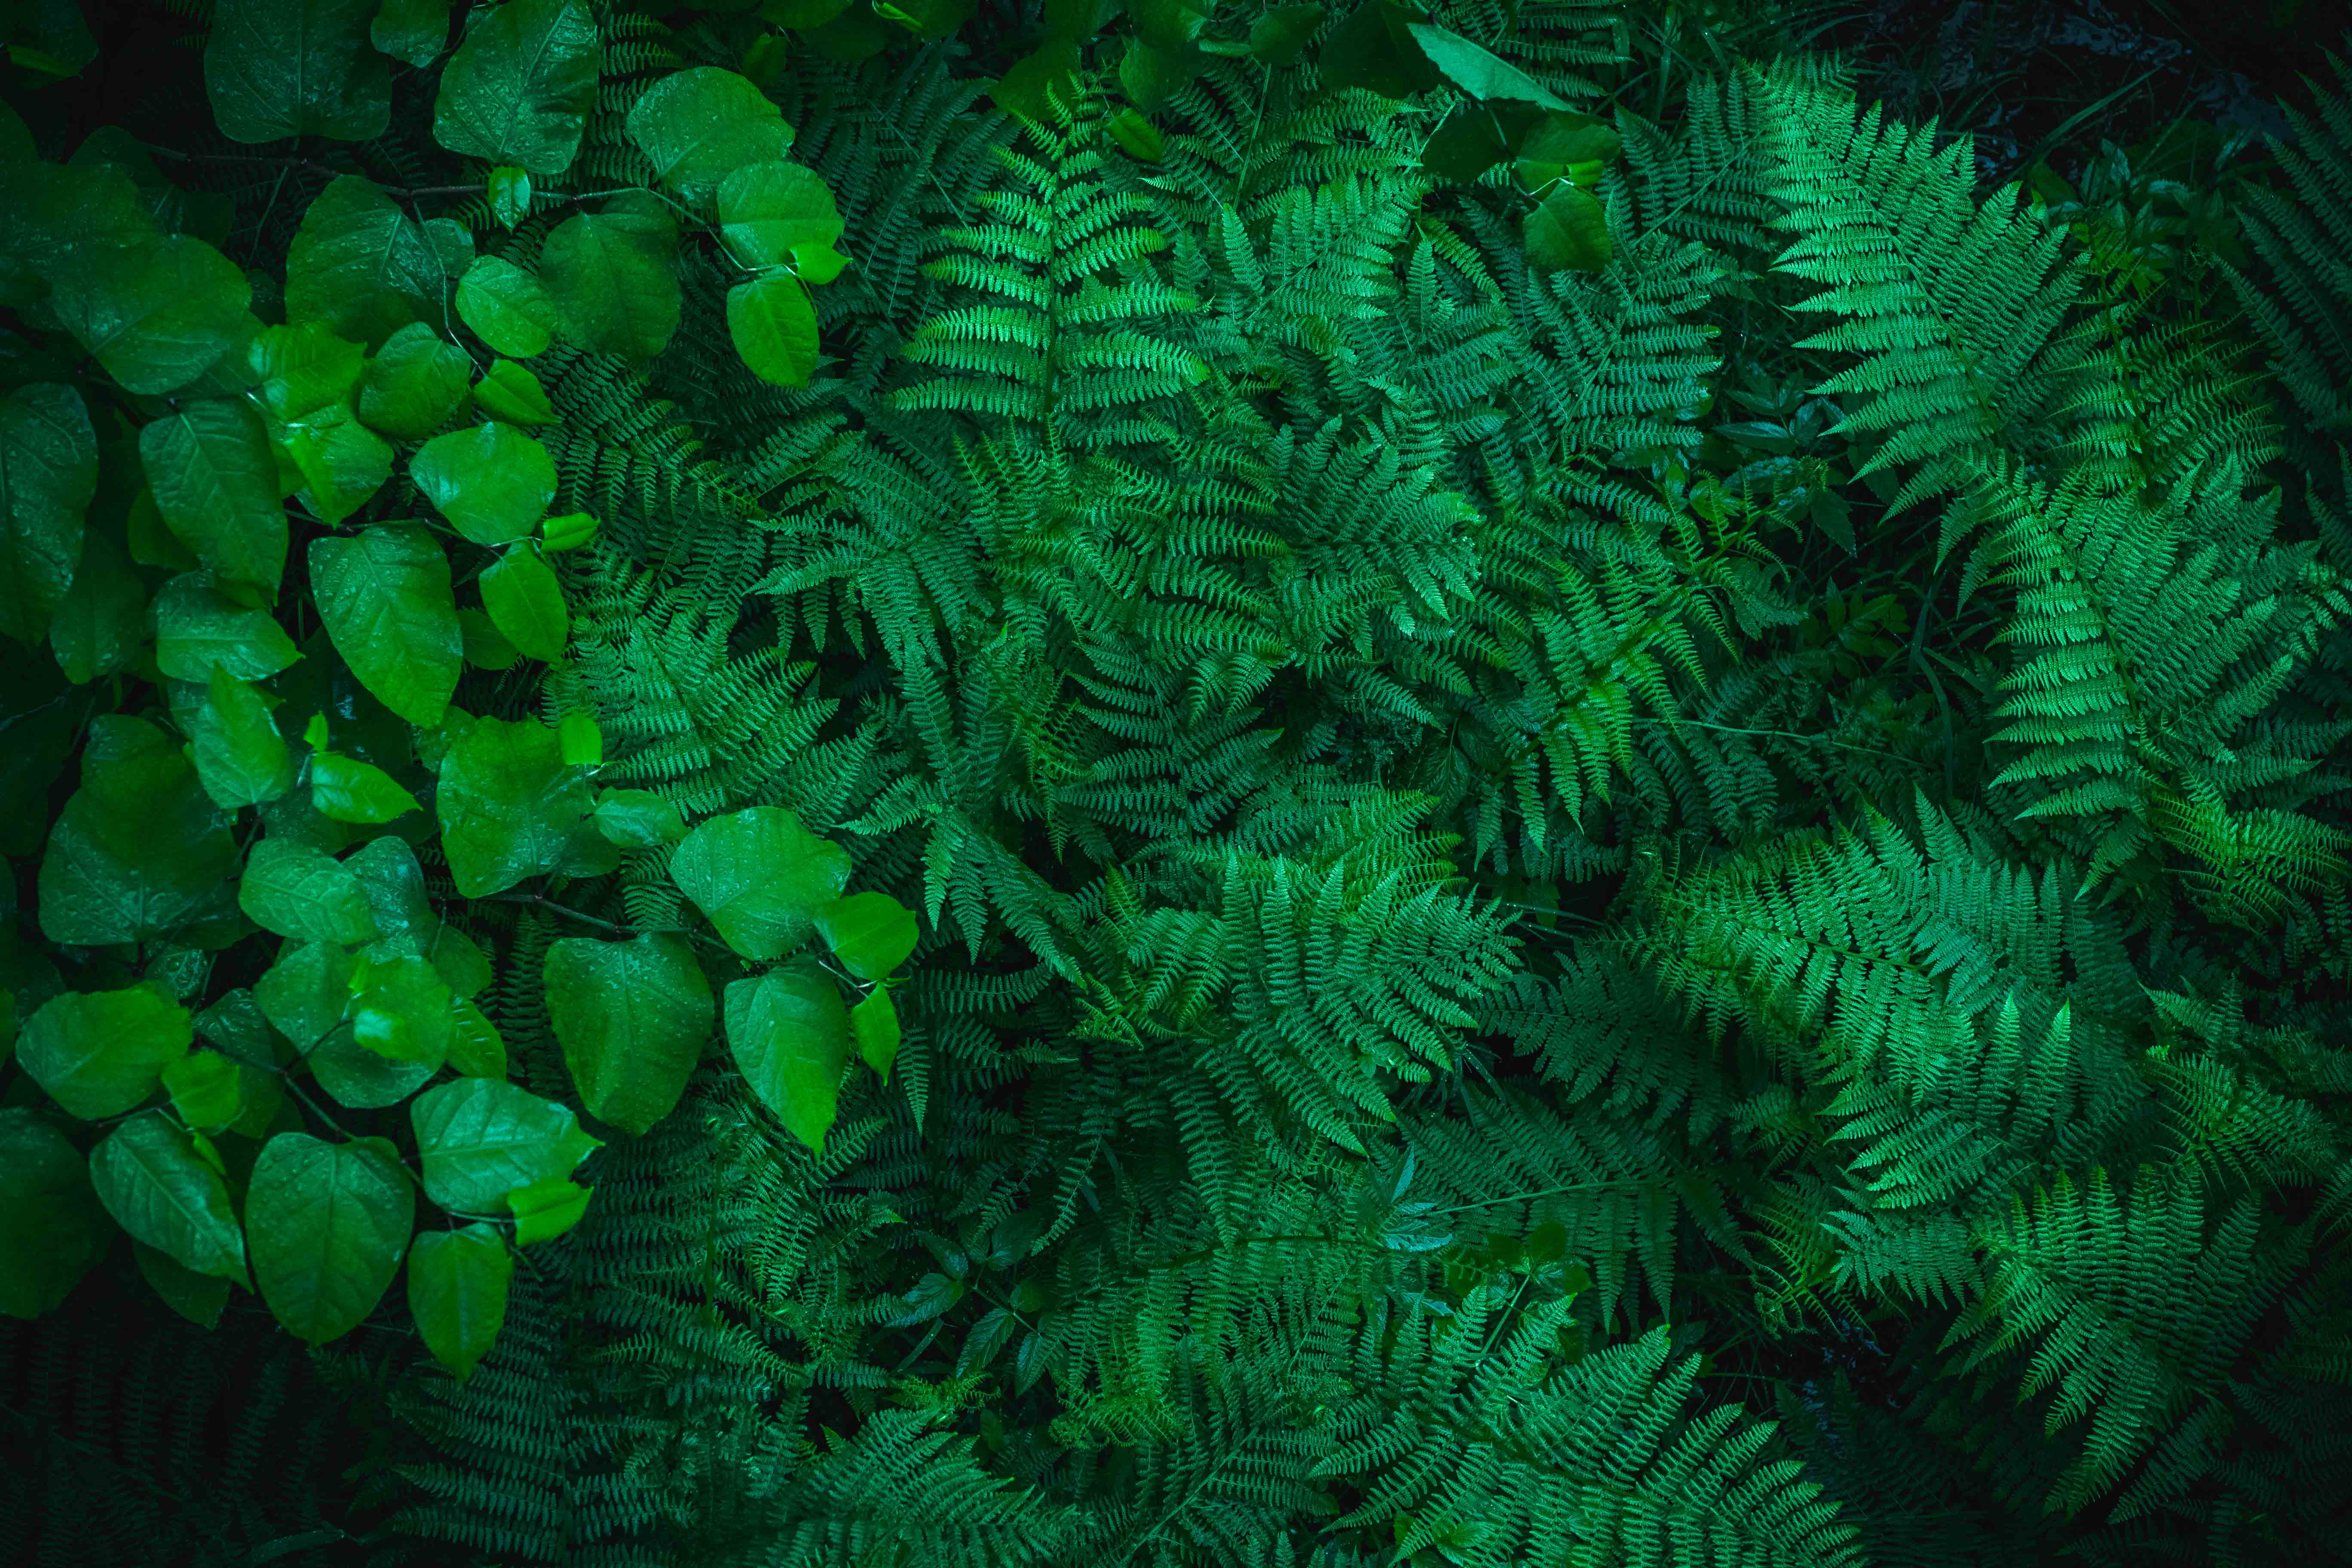 Aerial view of ferns and plants in a forest in the pacific northwest, oregon.